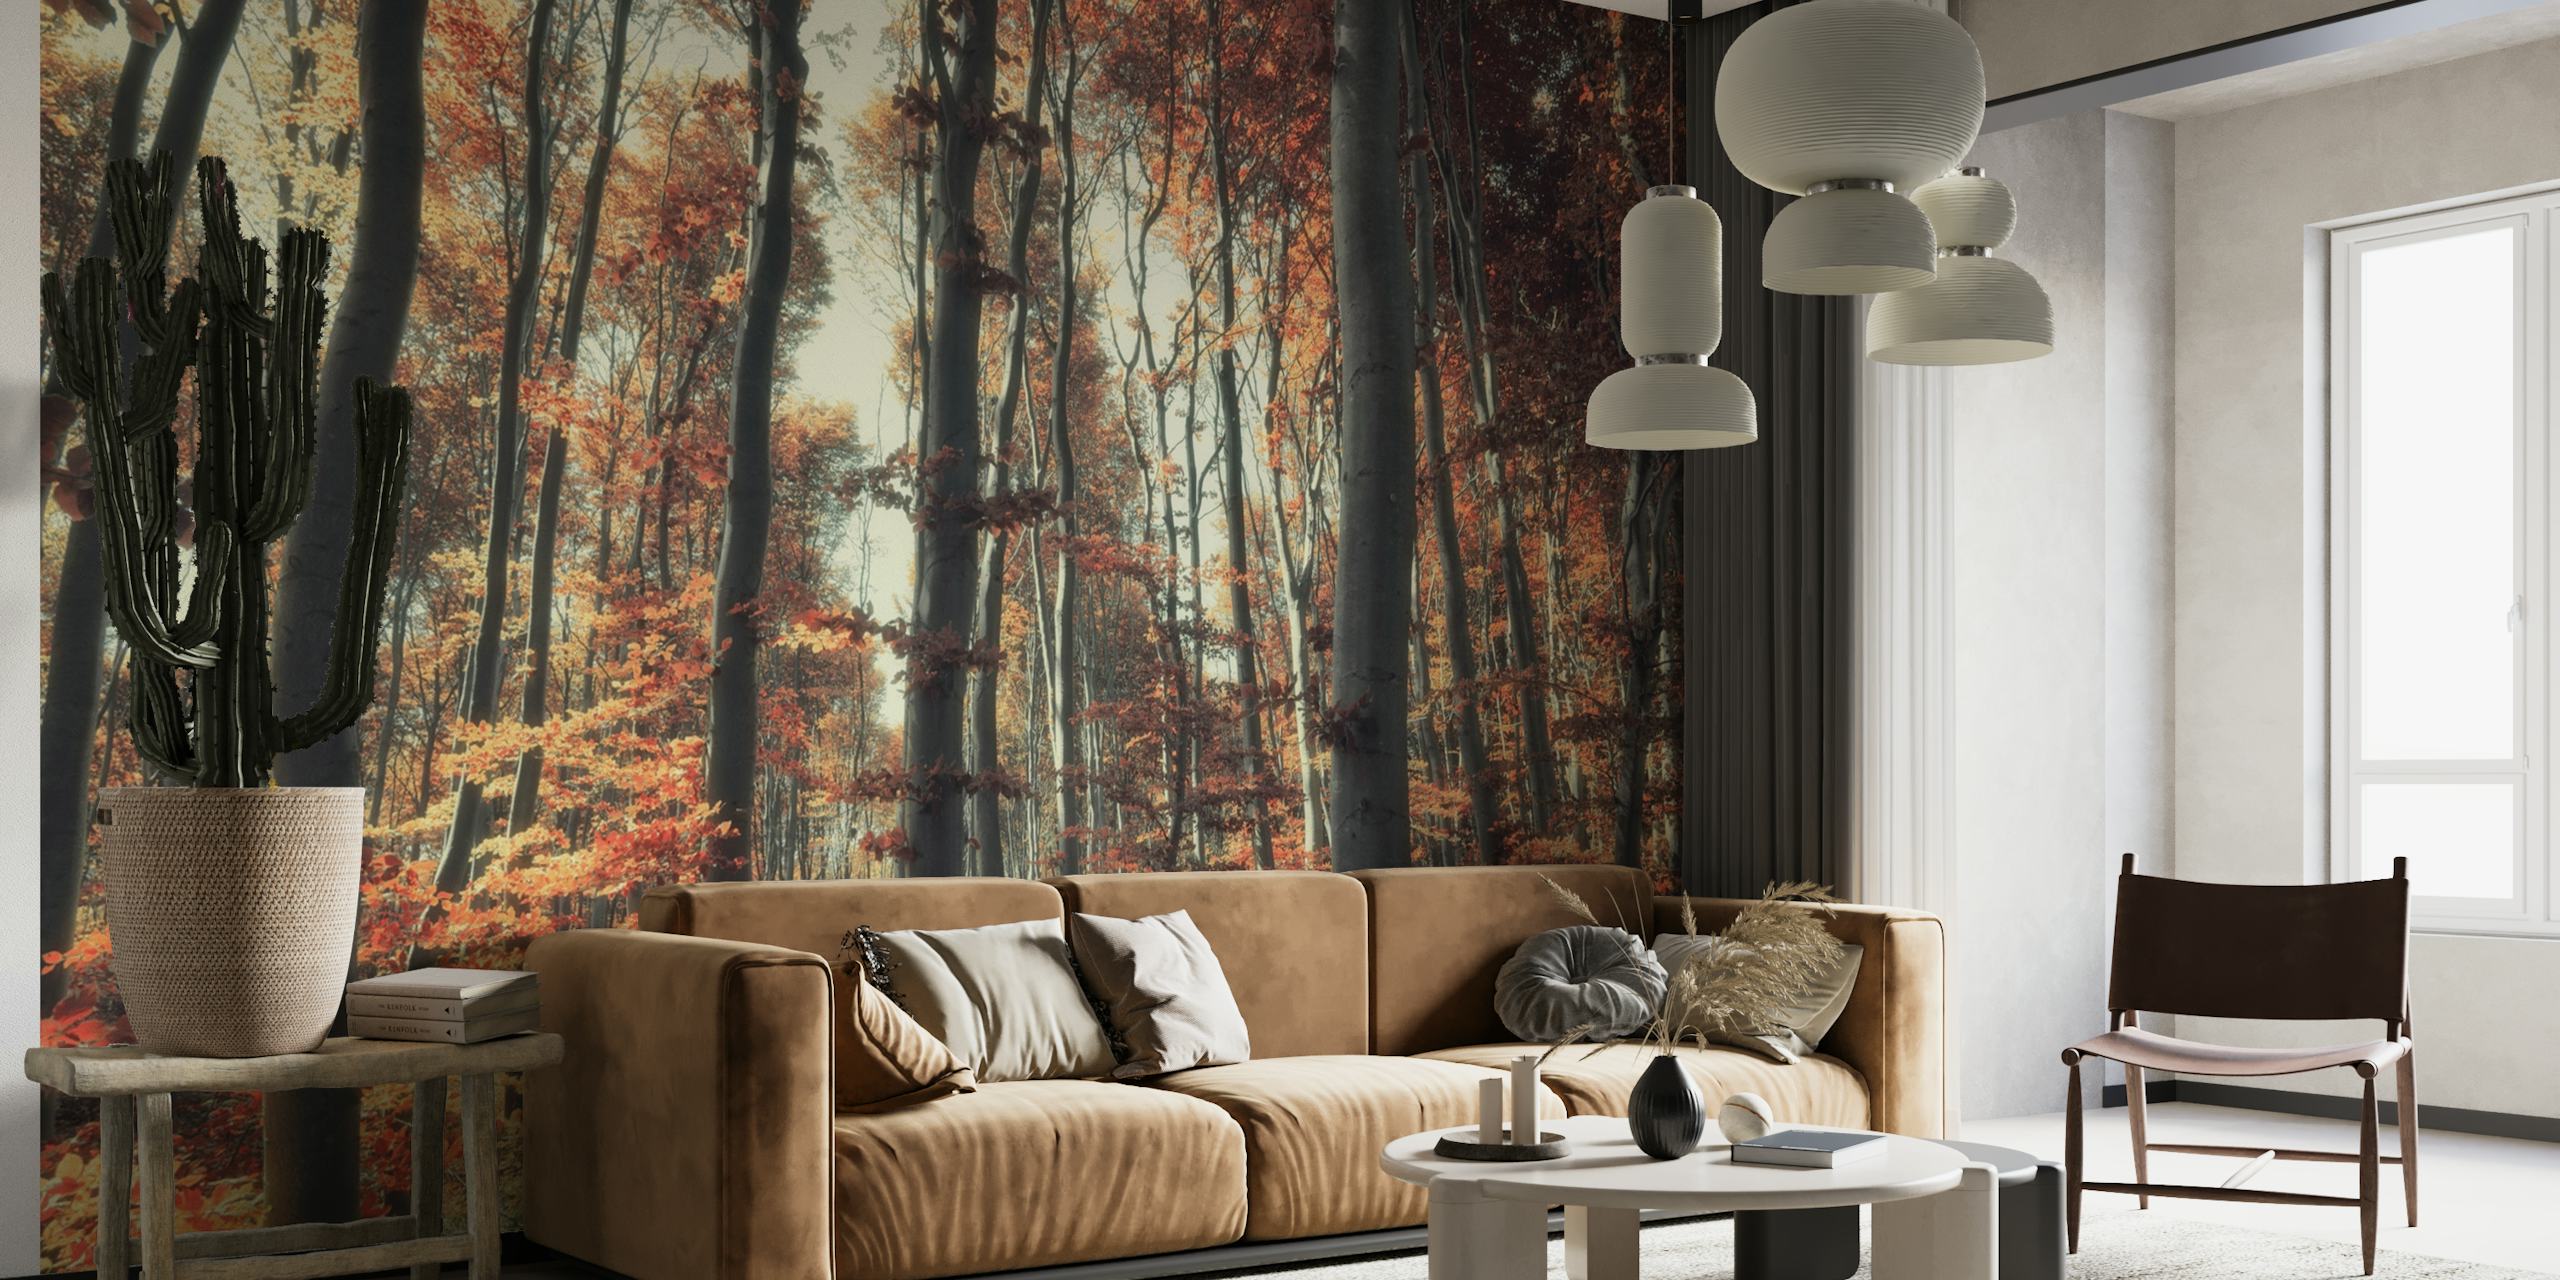 Autumn forest wall mural with red, orange, and gold foliage